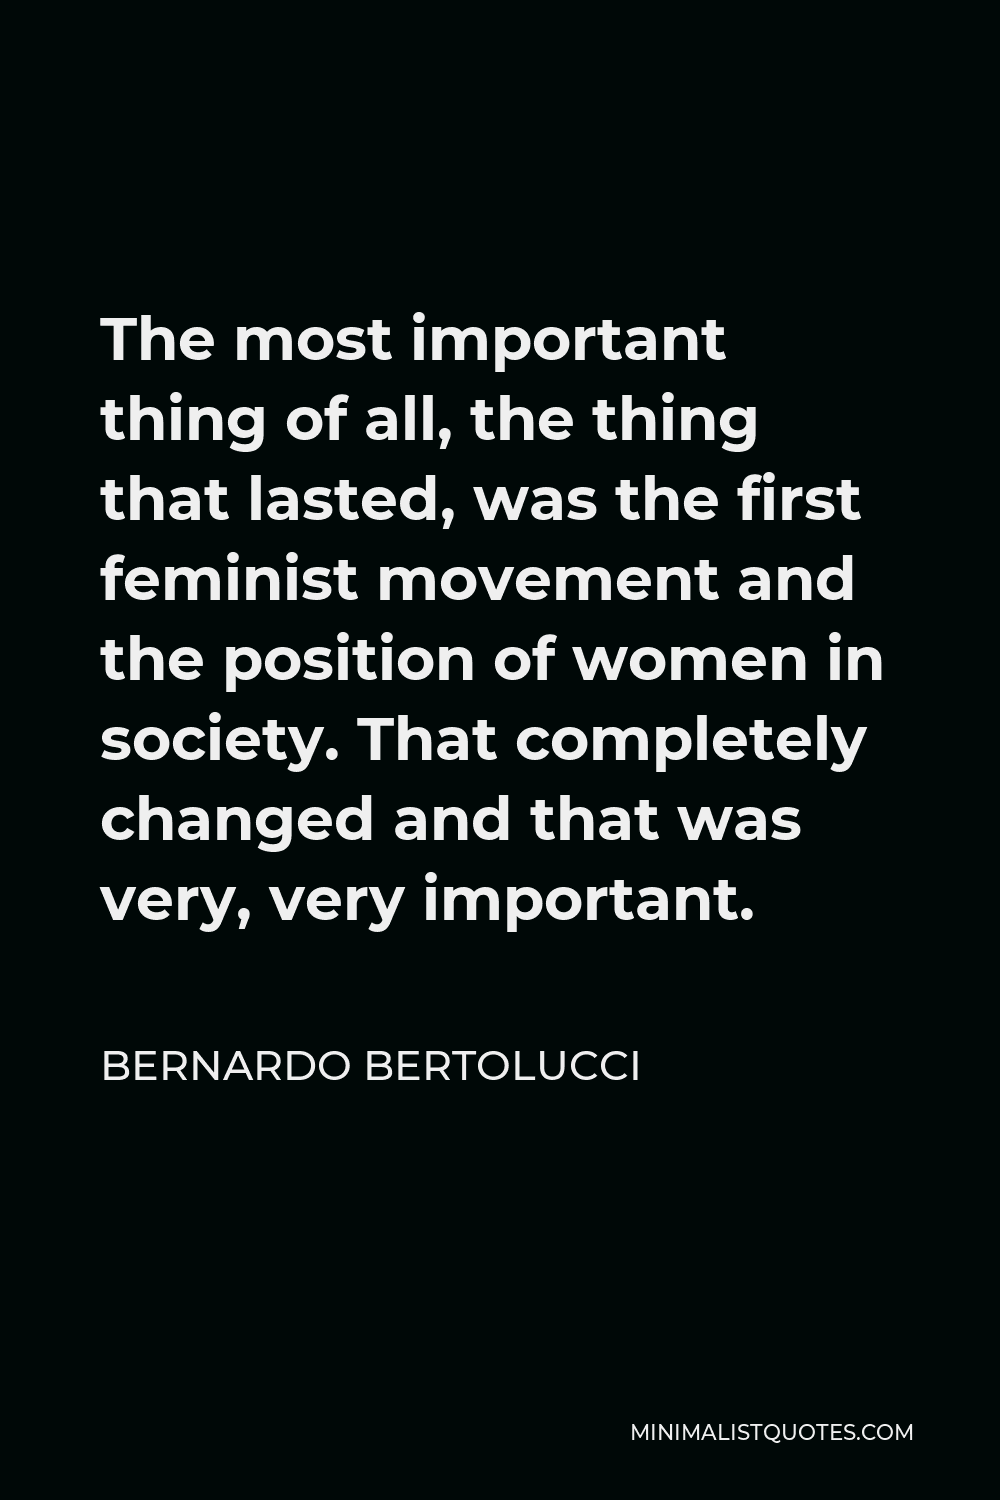 Bernardo Bertolucci Quote - The most important thing of all, the thing that lasted, was the first feminist movement and the position of women in society. That completely changed and that was very, very important.